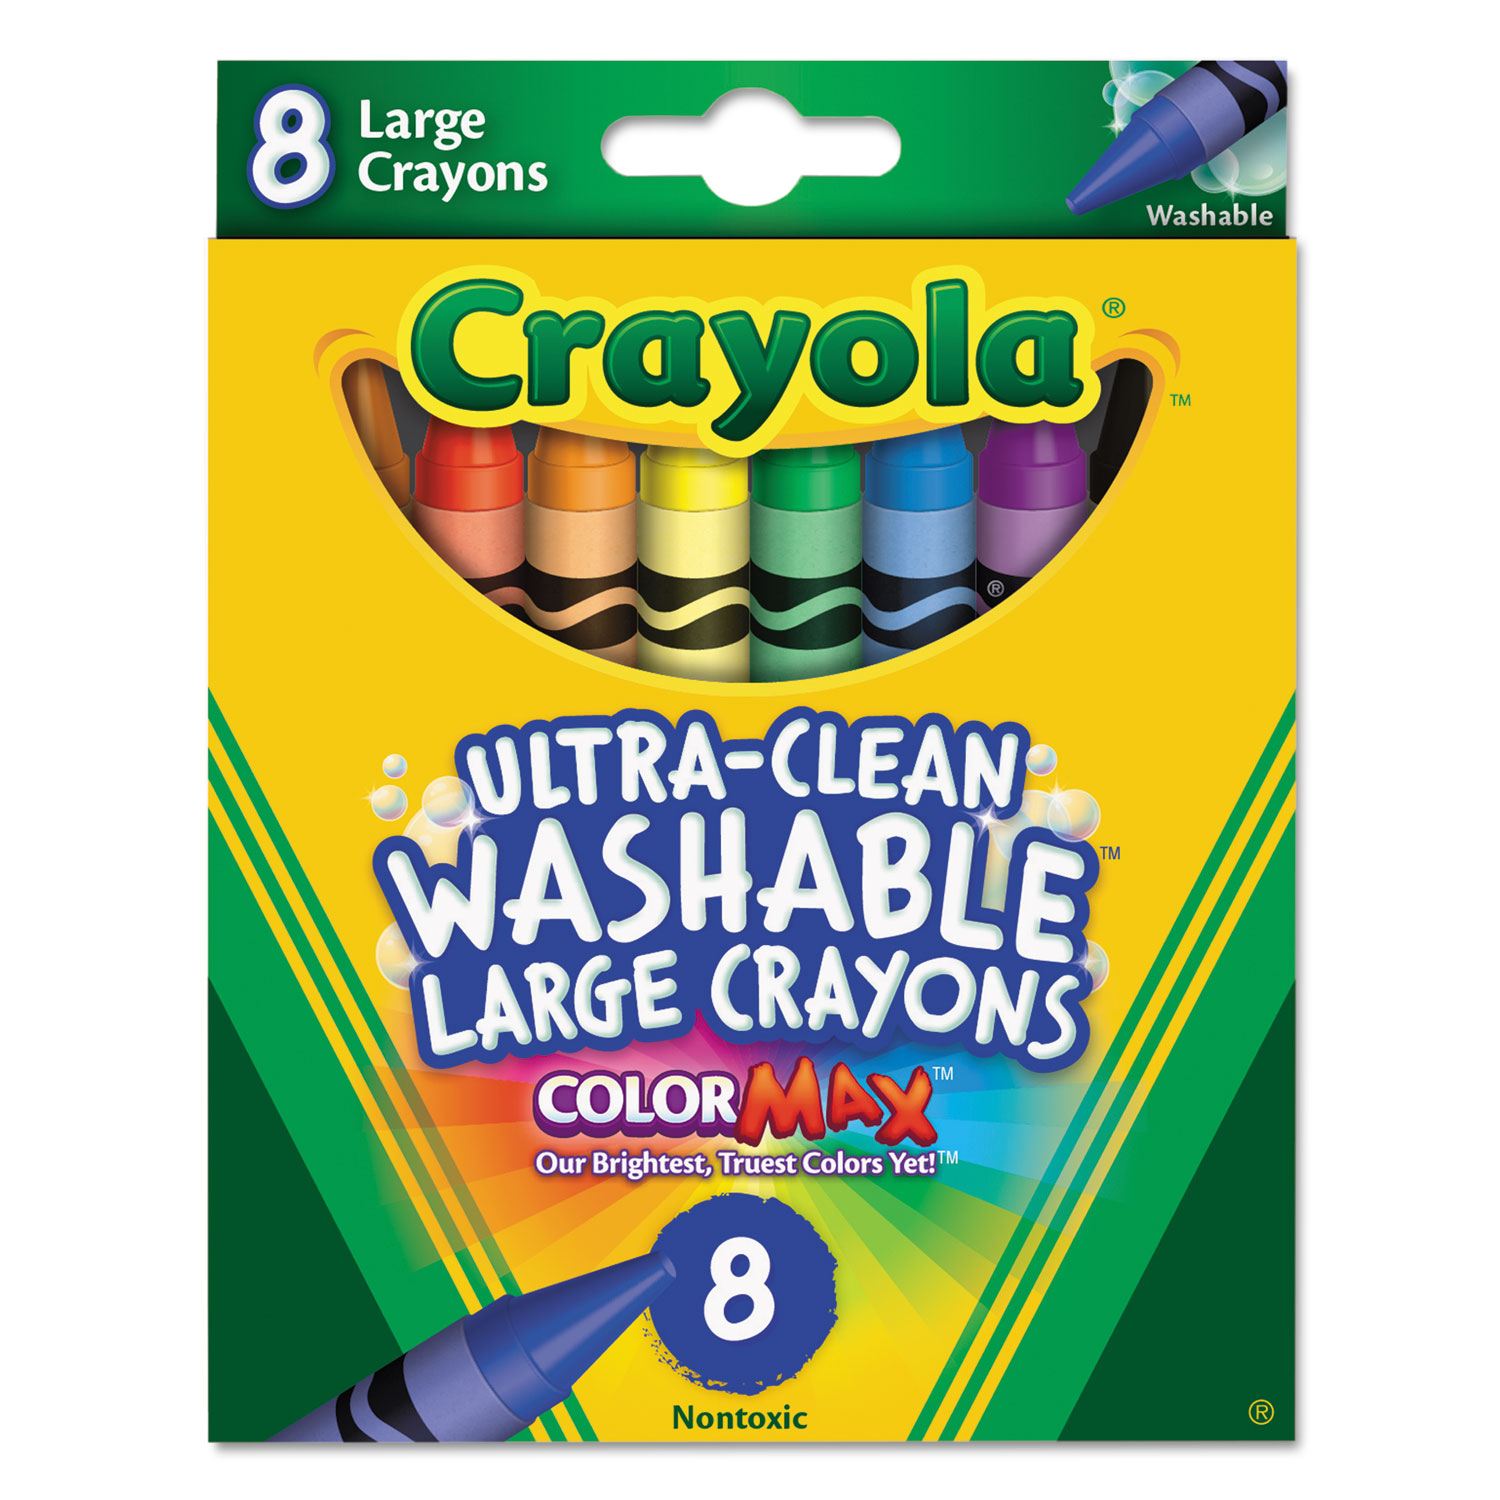 Classic Color Crayons, Peggable Retail Pack, 24 Colors